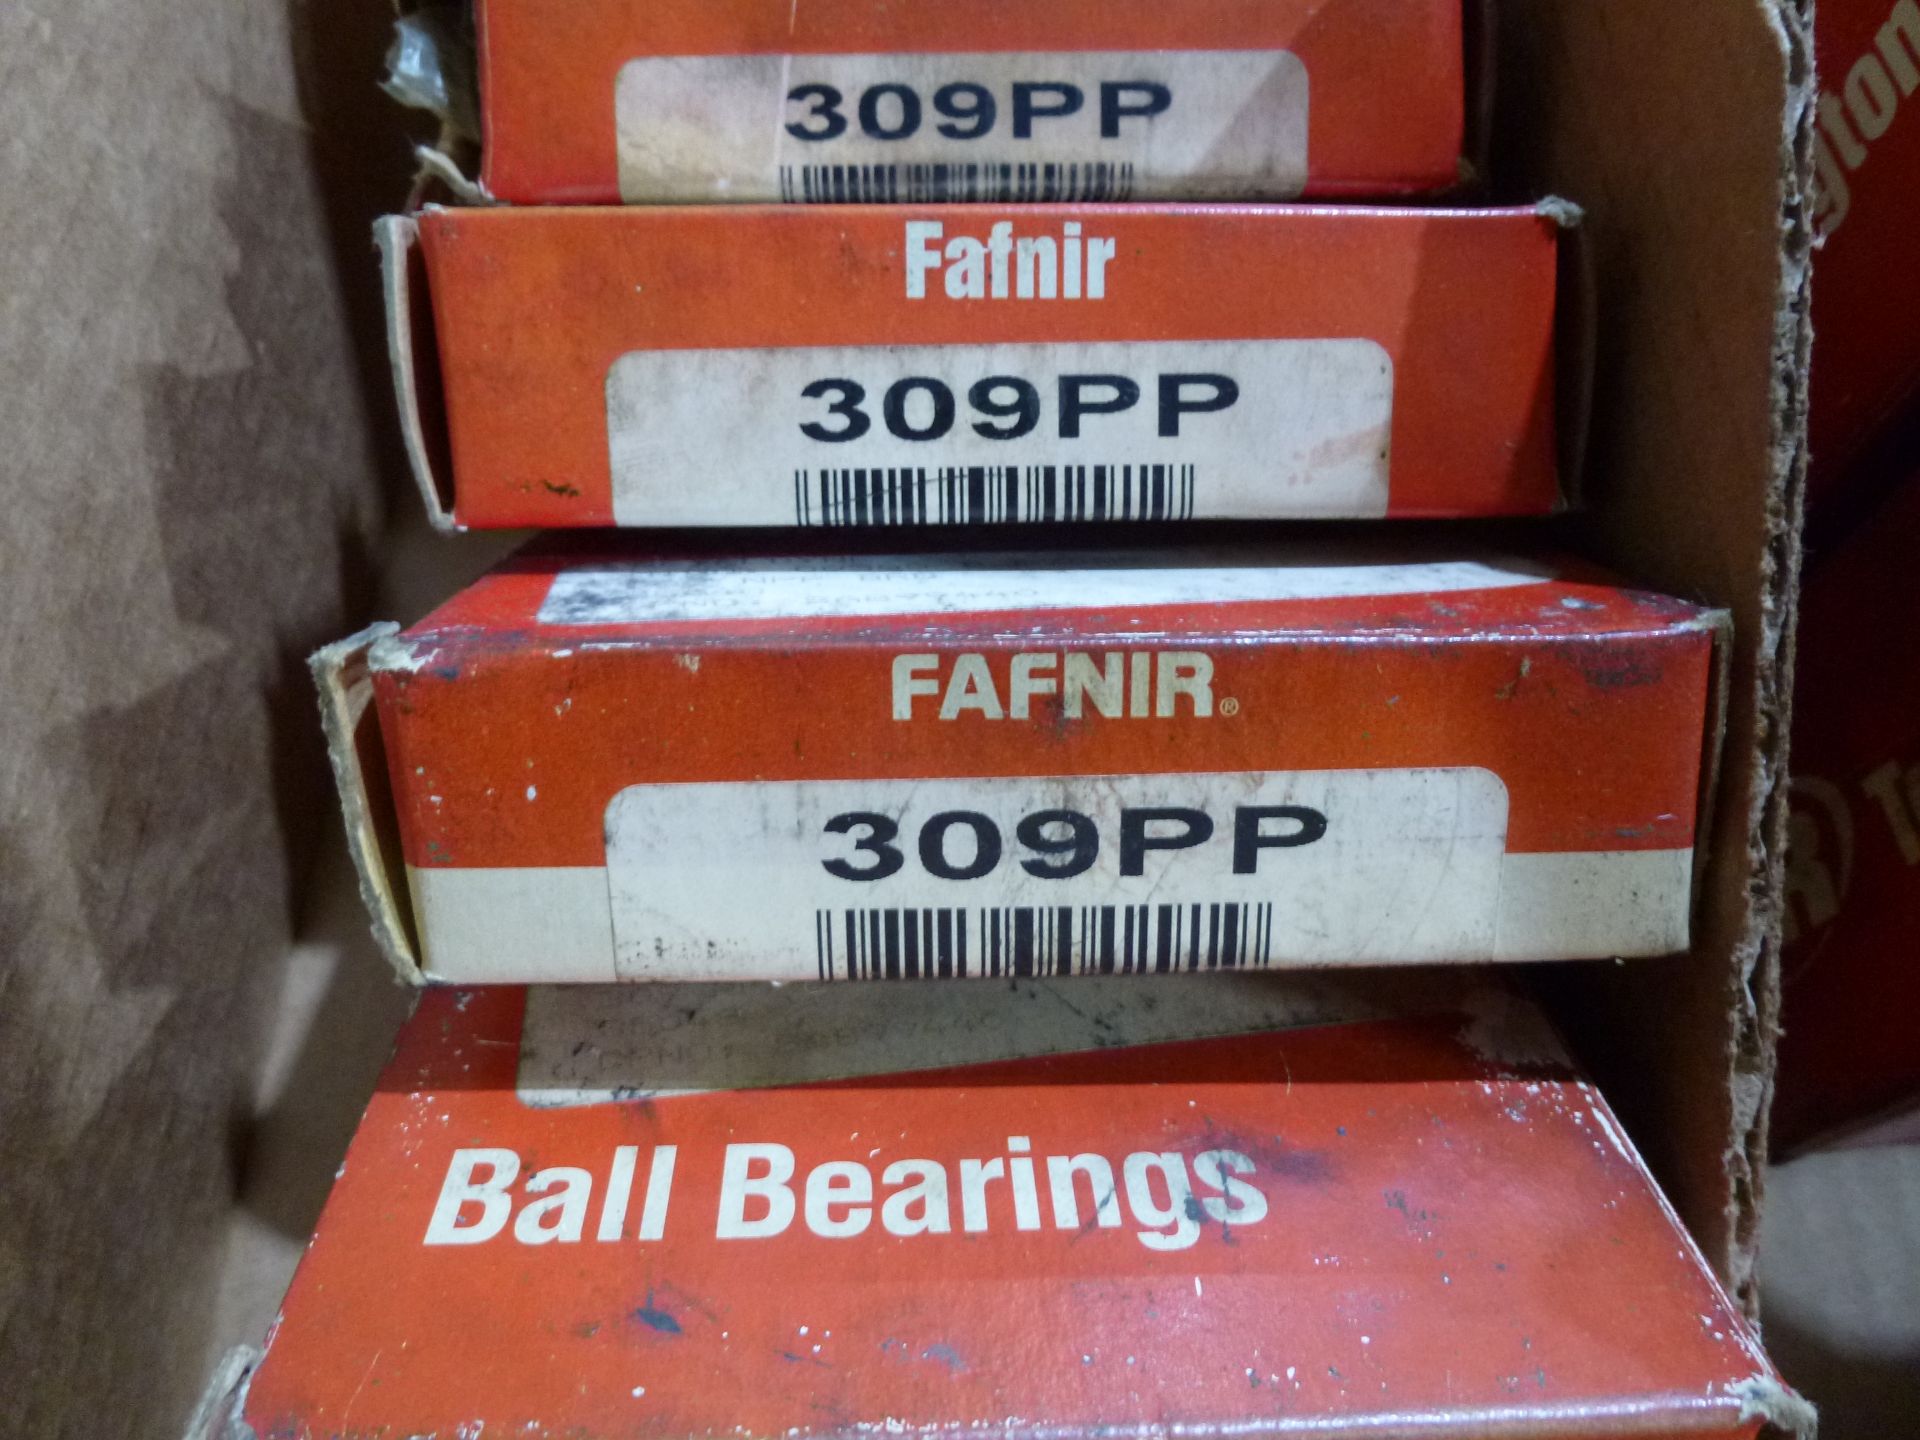 Qty 6 Fafnir bearings 309PP, as always with Brolyn LLC auctions, all lots can be picked up from - Image 2 of 2